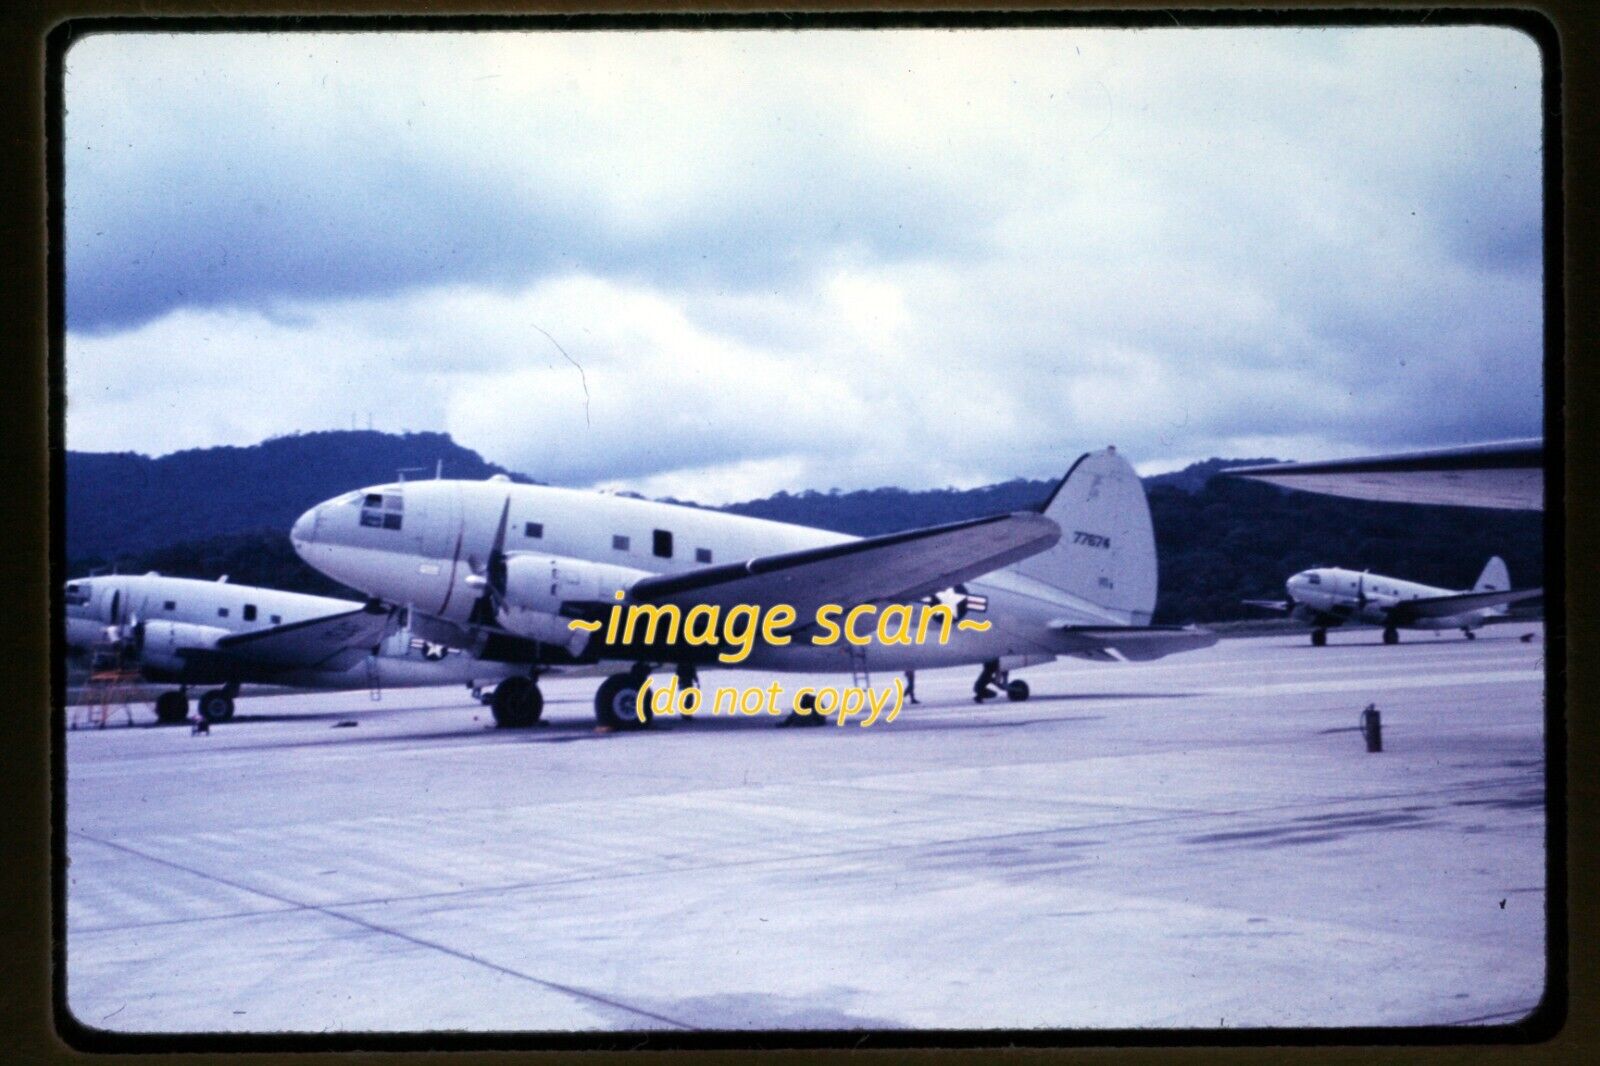 USAF Curtiss C-46 Commando 77674 Aircraft in 1960\'s, Duplicate Slide aa 19-6a